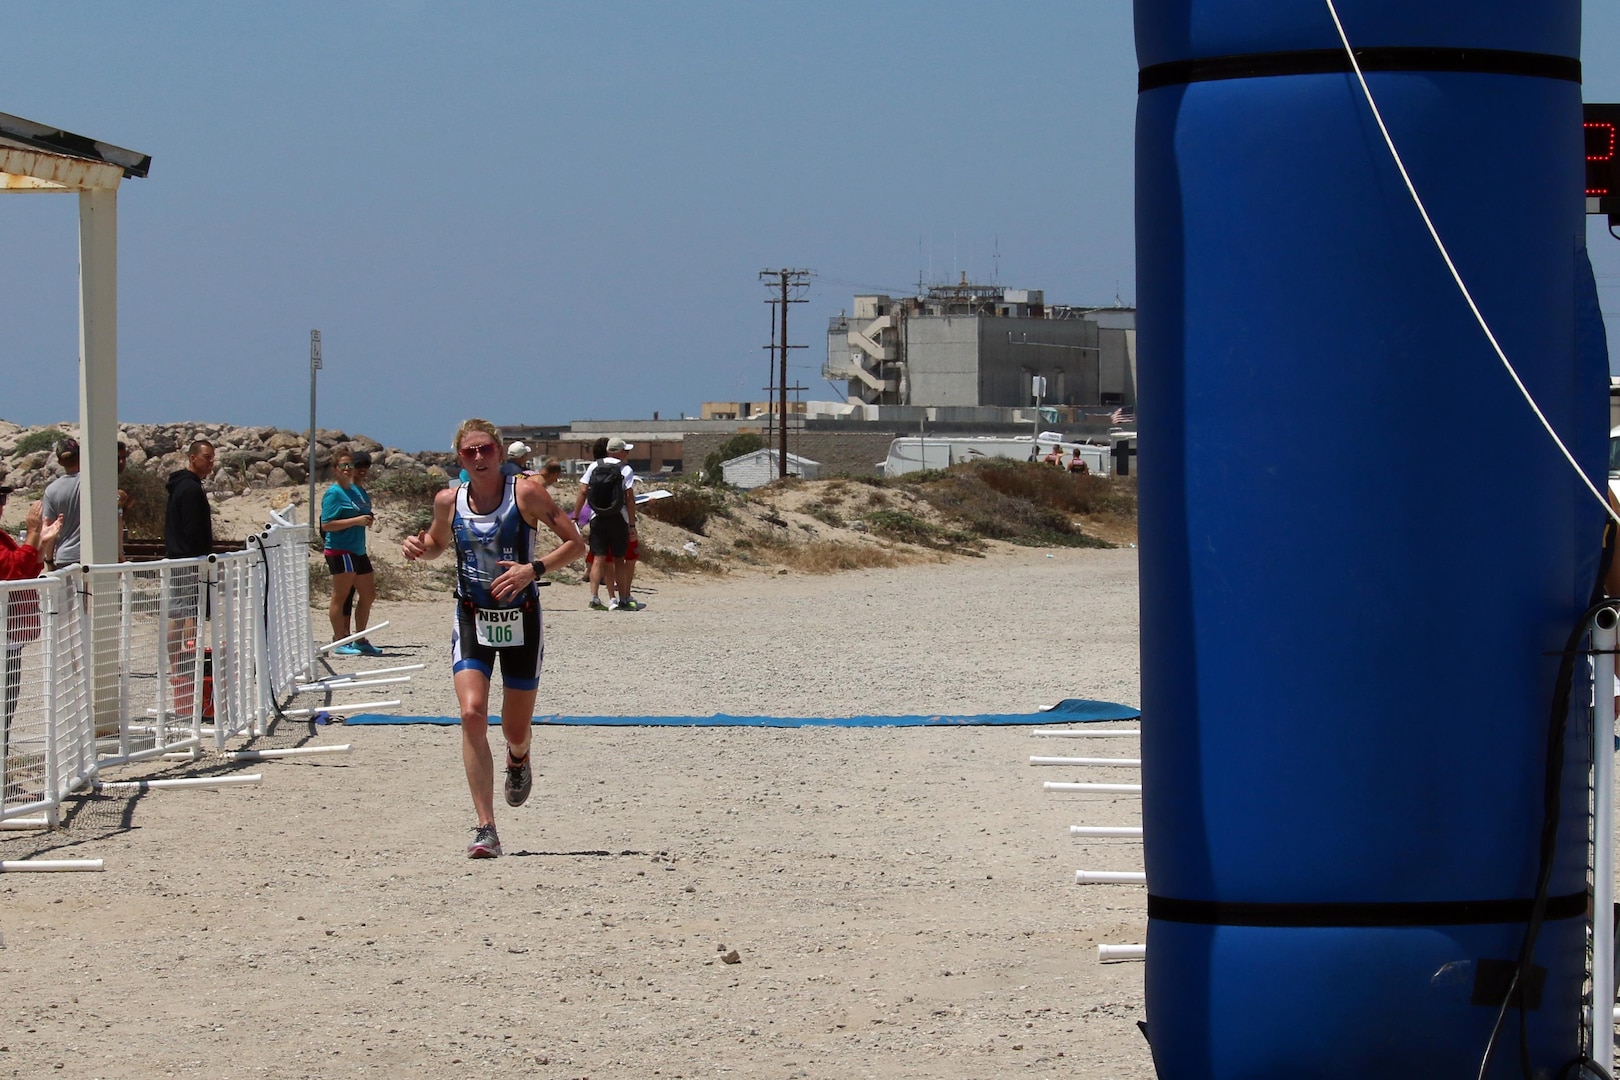 Air Force Maj Judith Coyle of Joint Base Lewis-McChord, Wash. captures the Armed Forces Women's Triathlon crown.  The 2016 Armed Forces Triathlon Championship was held at Naval Base Ventura County, Calif. on 18 June.  